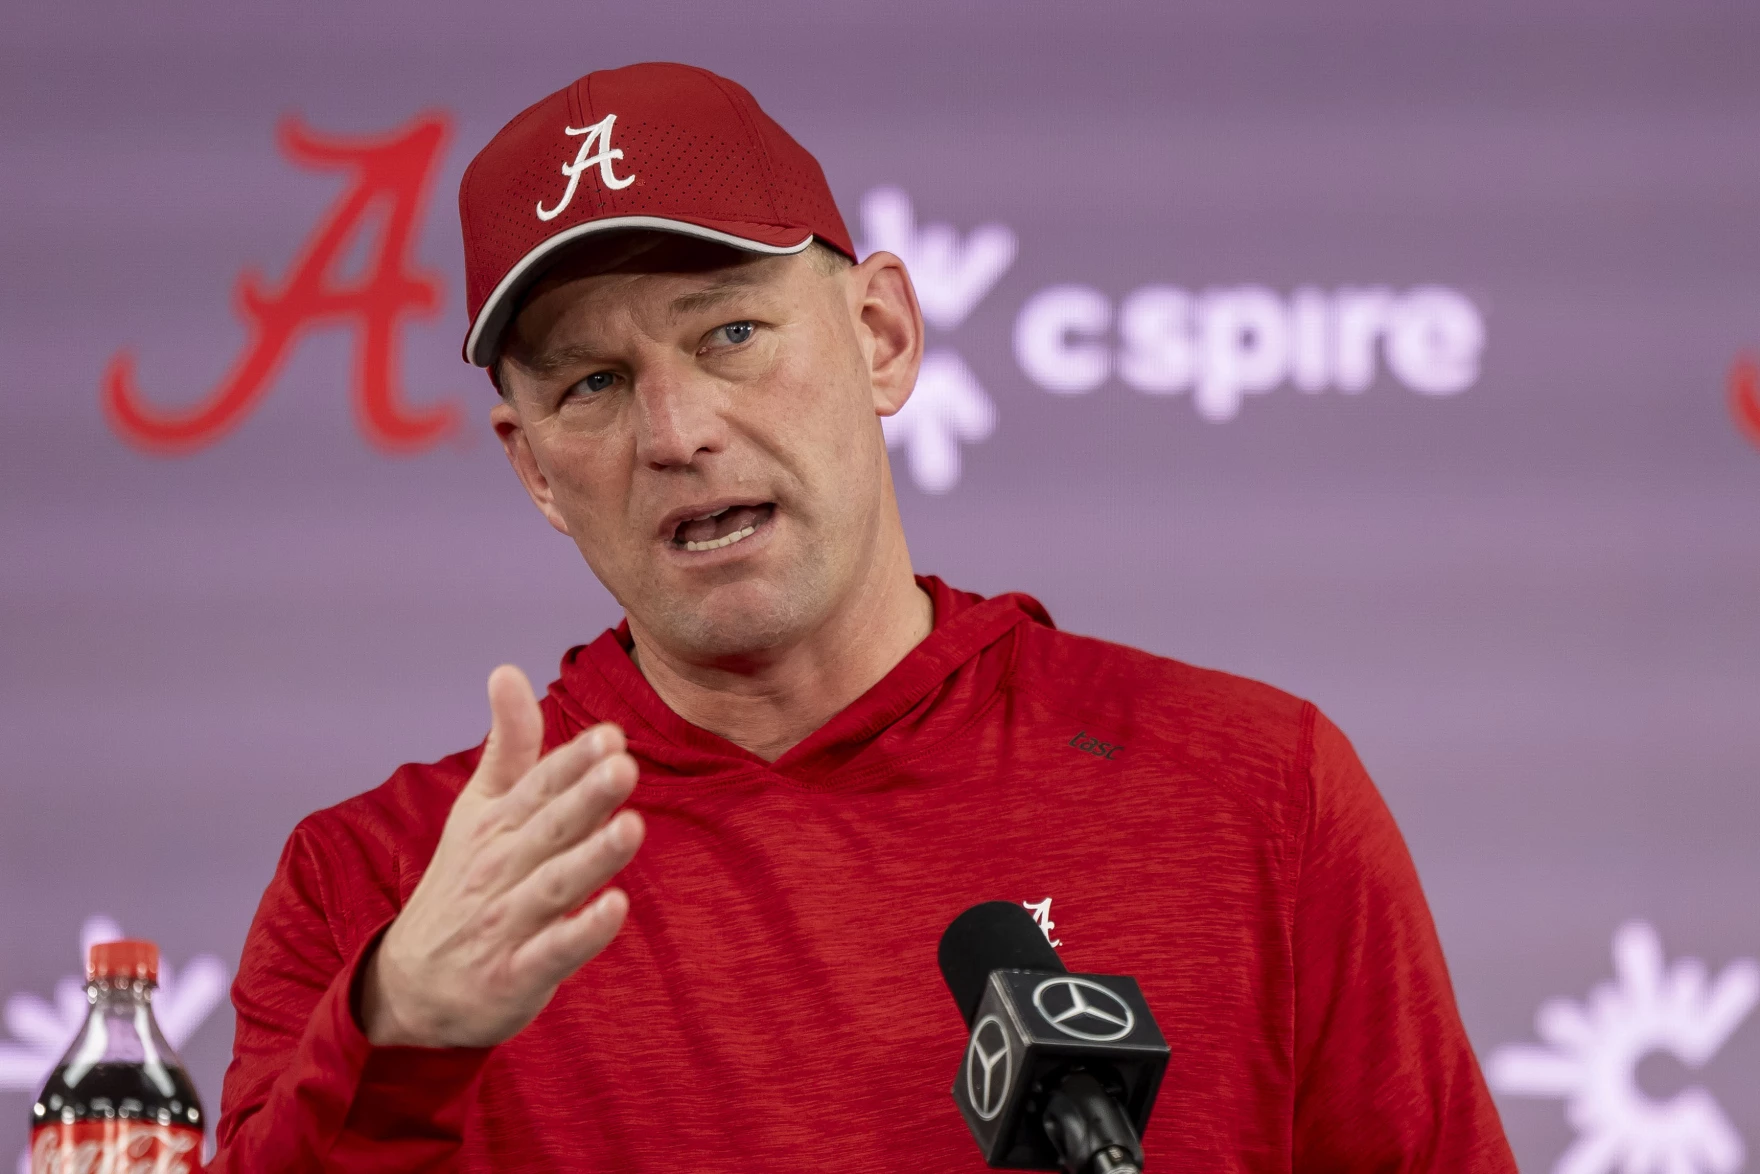 Alabama Head Coach Kalen DeBoer Has Sign To Suspend Two Players Due To………